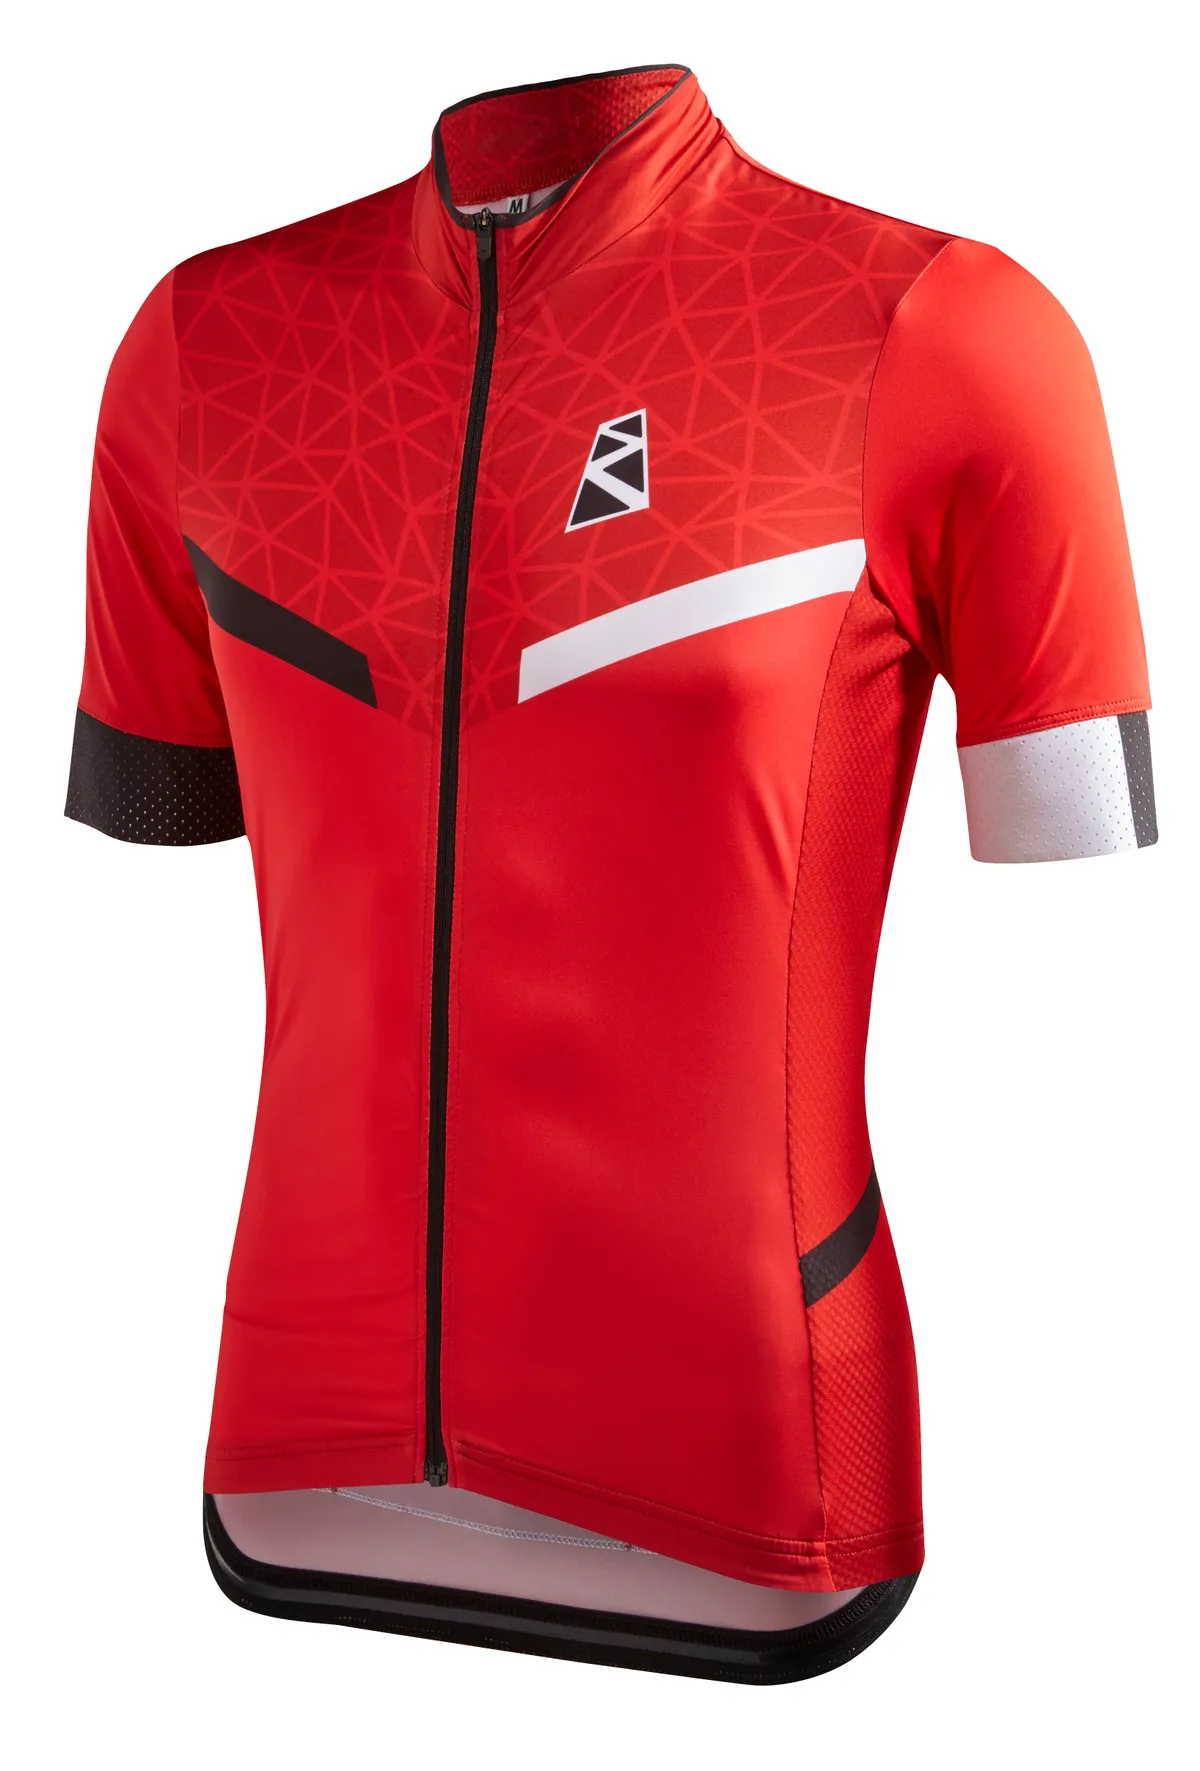 Ribble Nuovo Jersey